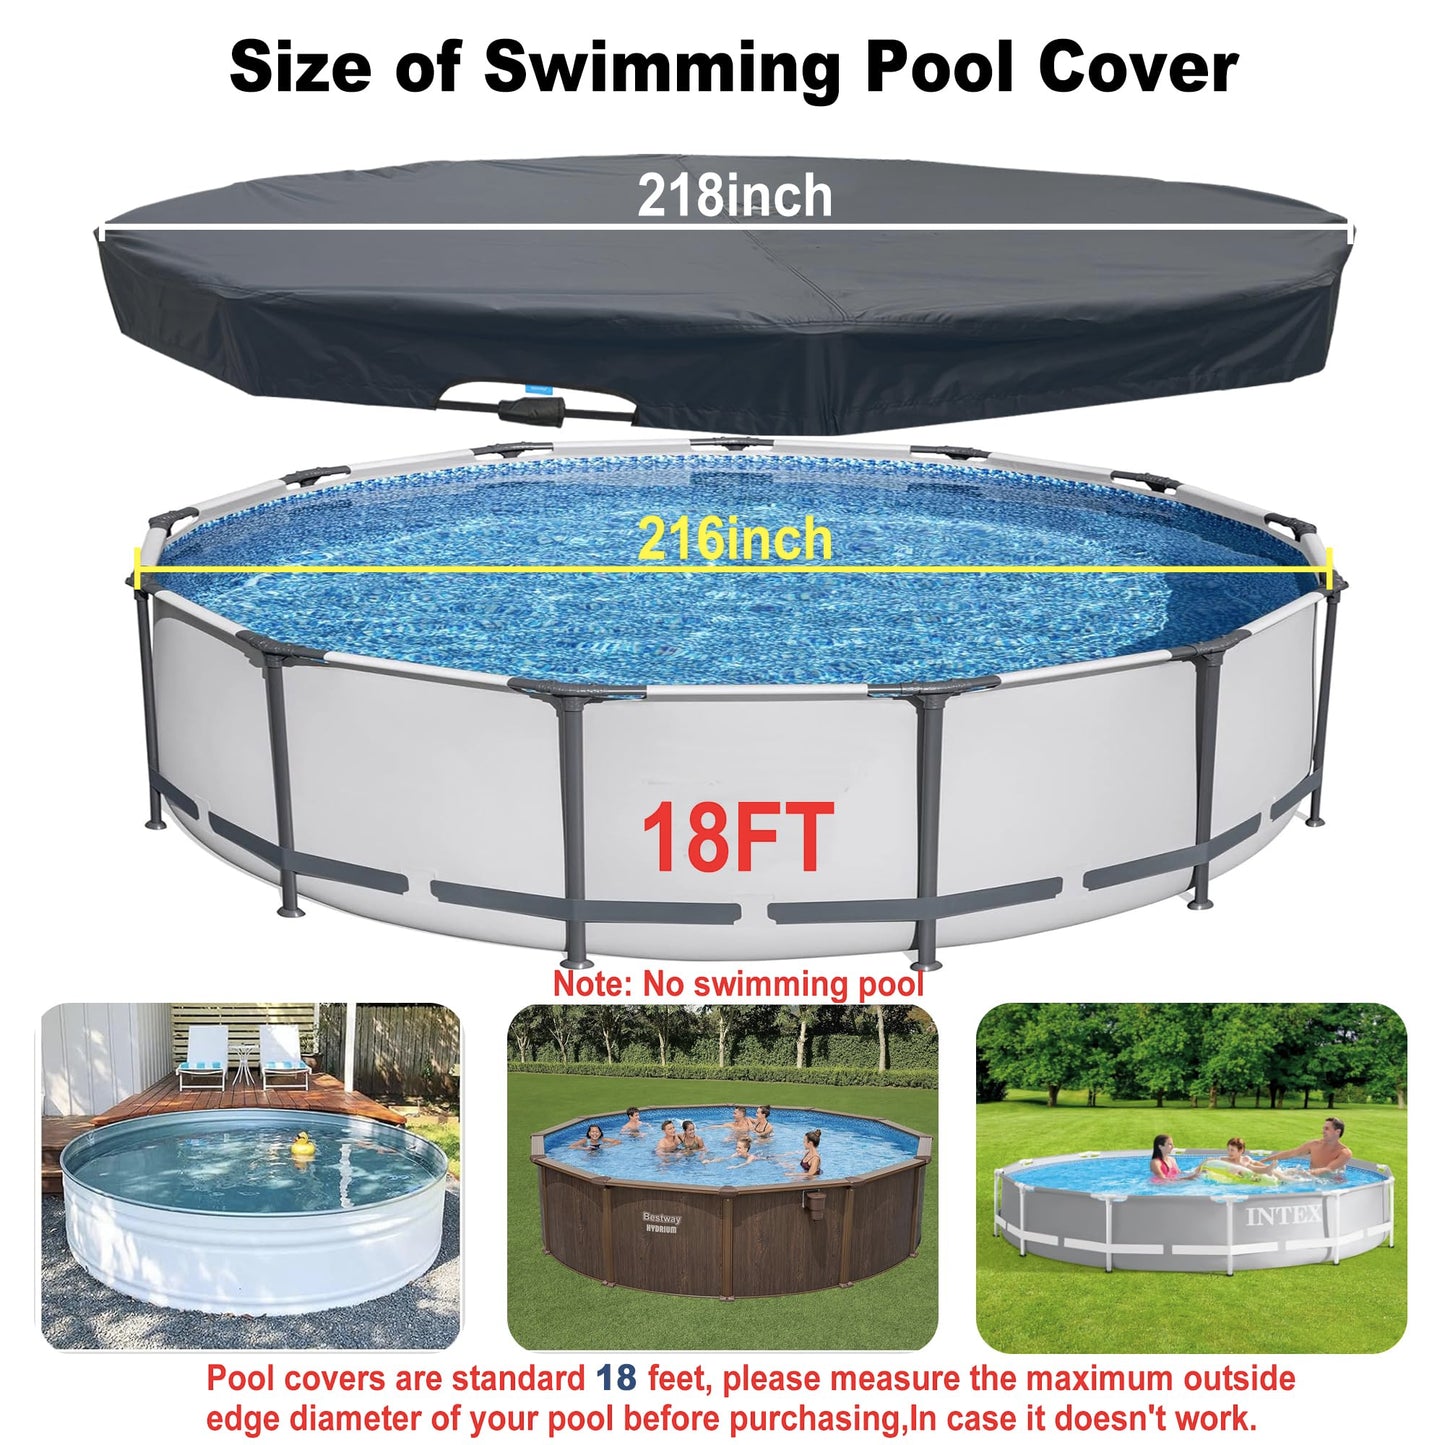 SIHAIAN 18 Ft Pool Cover with Automatic Drain Above Ground Pool Cover, Easy Installation Round Pool Cover Protector, Round Hot Tub Cover Ideal for hydrophilic and Dustproof Solar Pool Cover